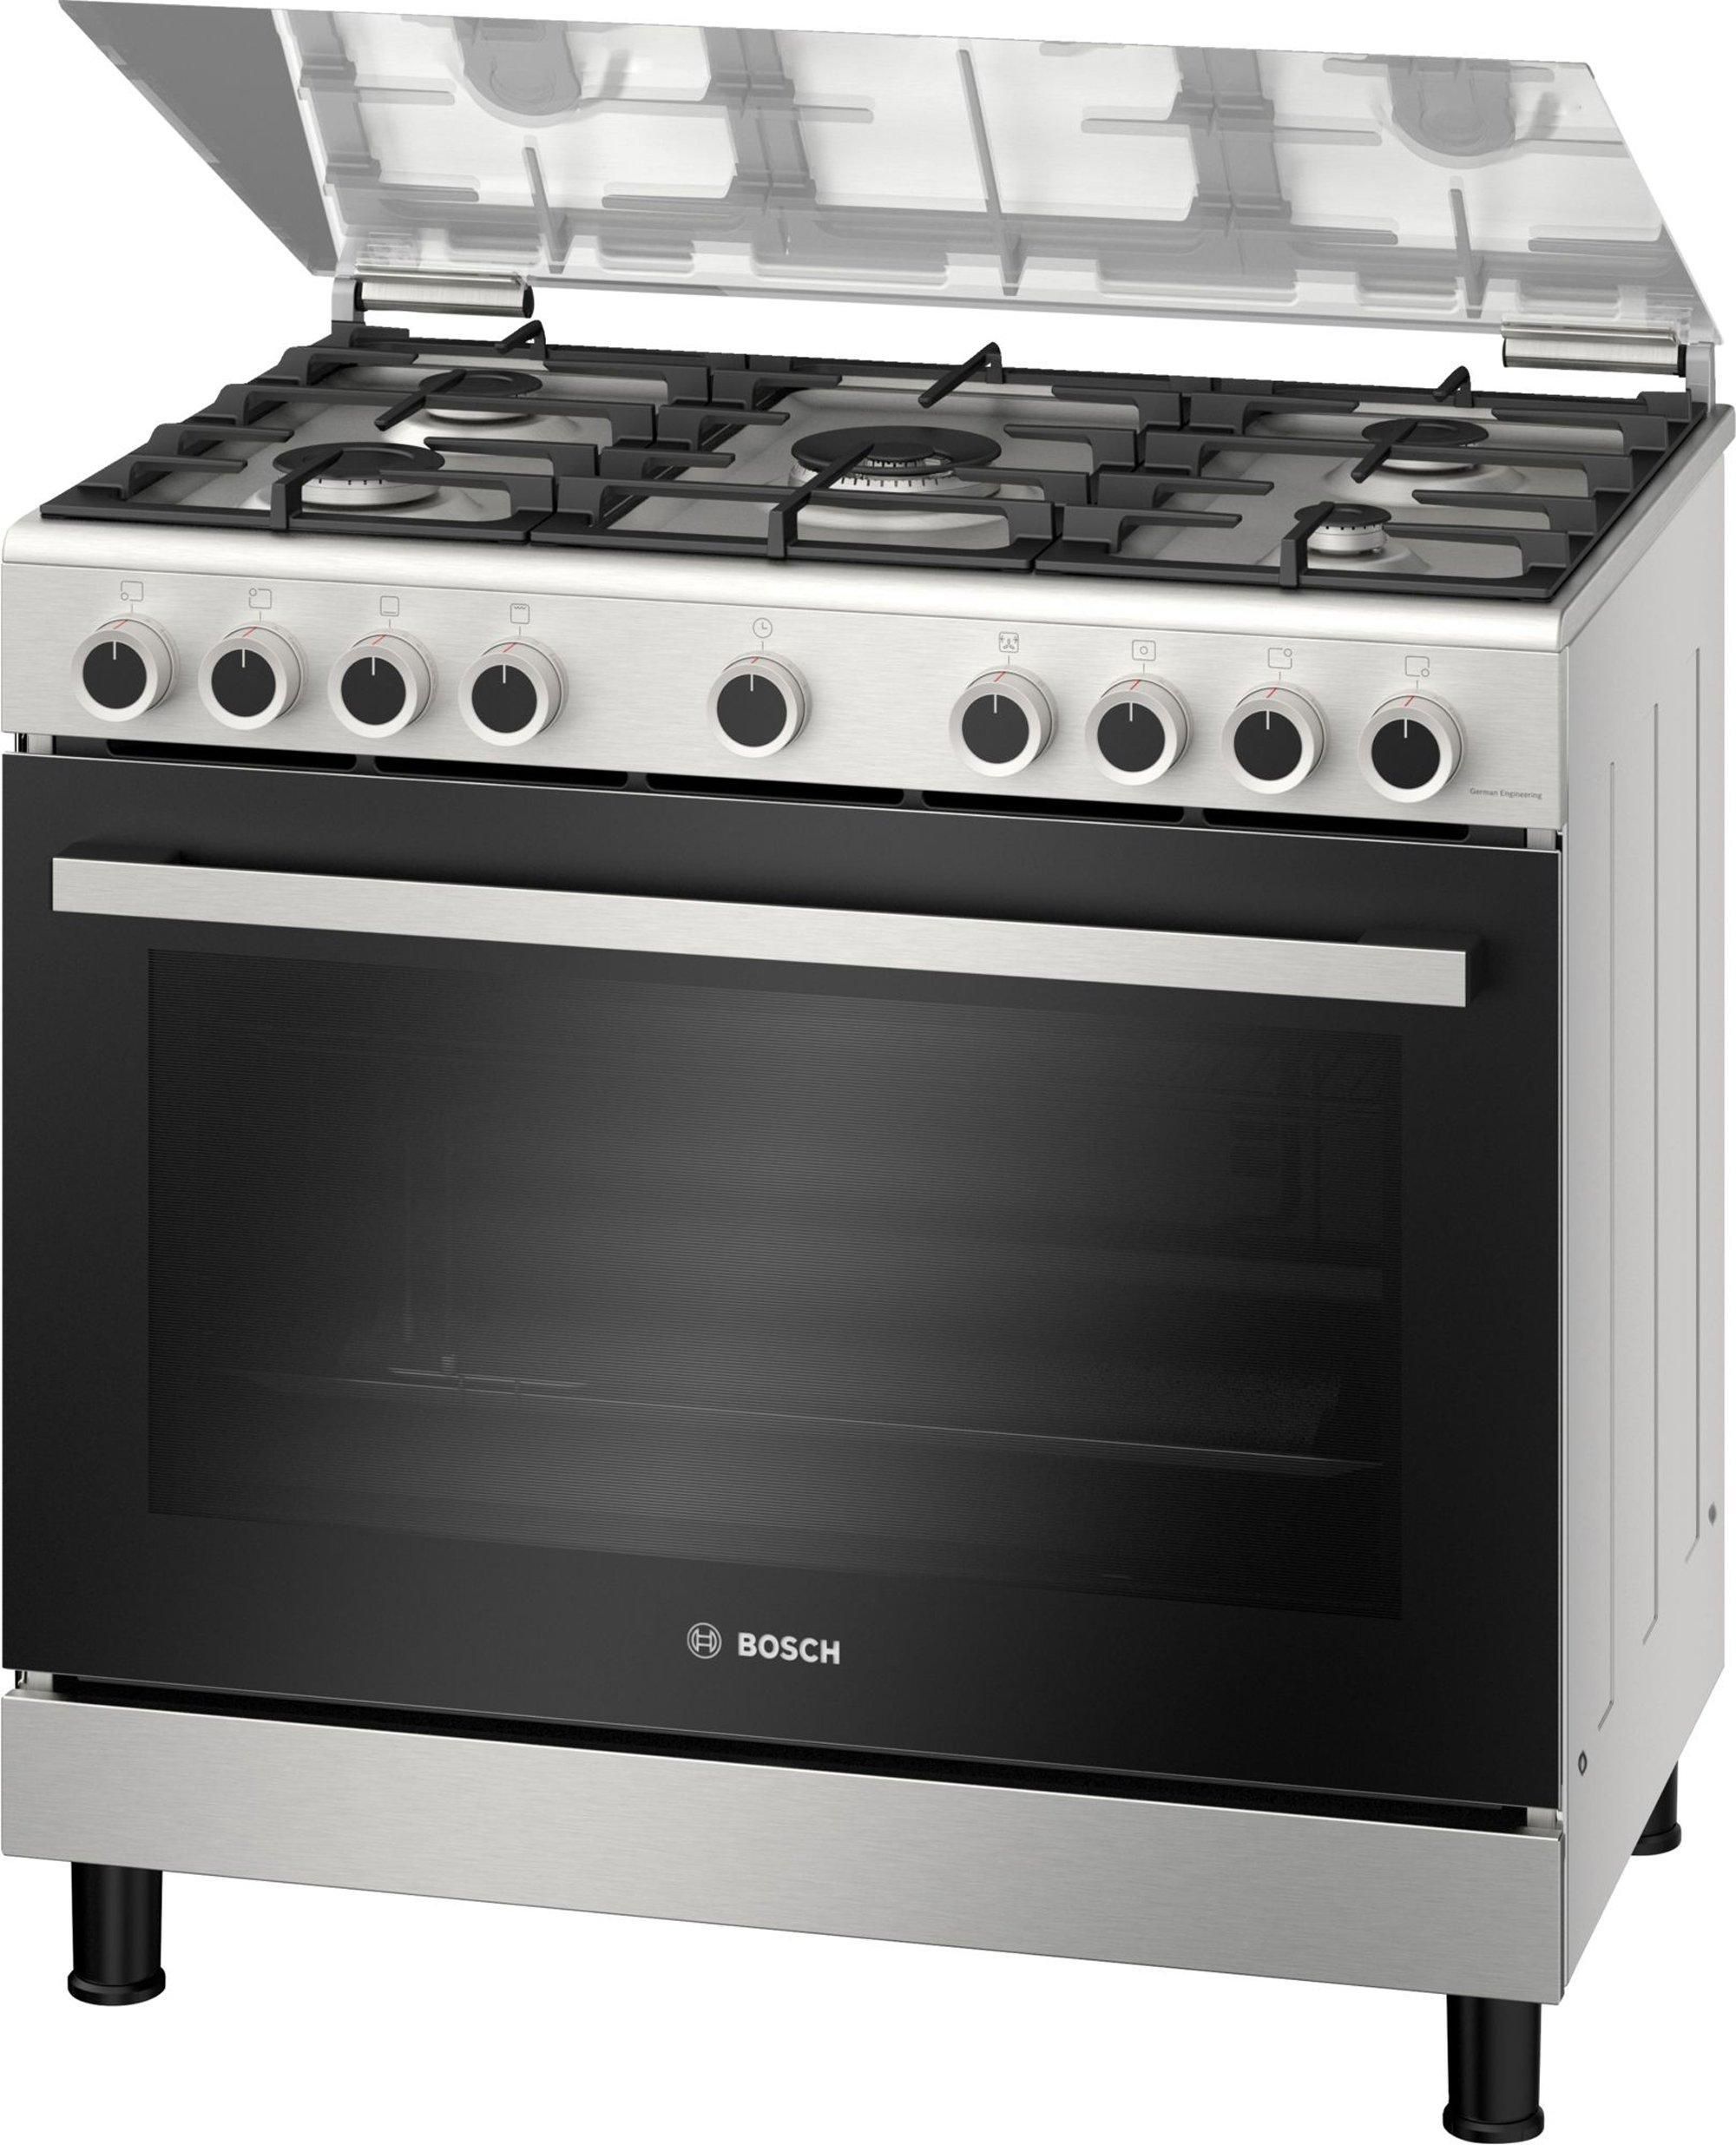 Bosch, Gas Cooker, 90X60, 5 Gas Burner, Full Safety, Stainless Steel/Black